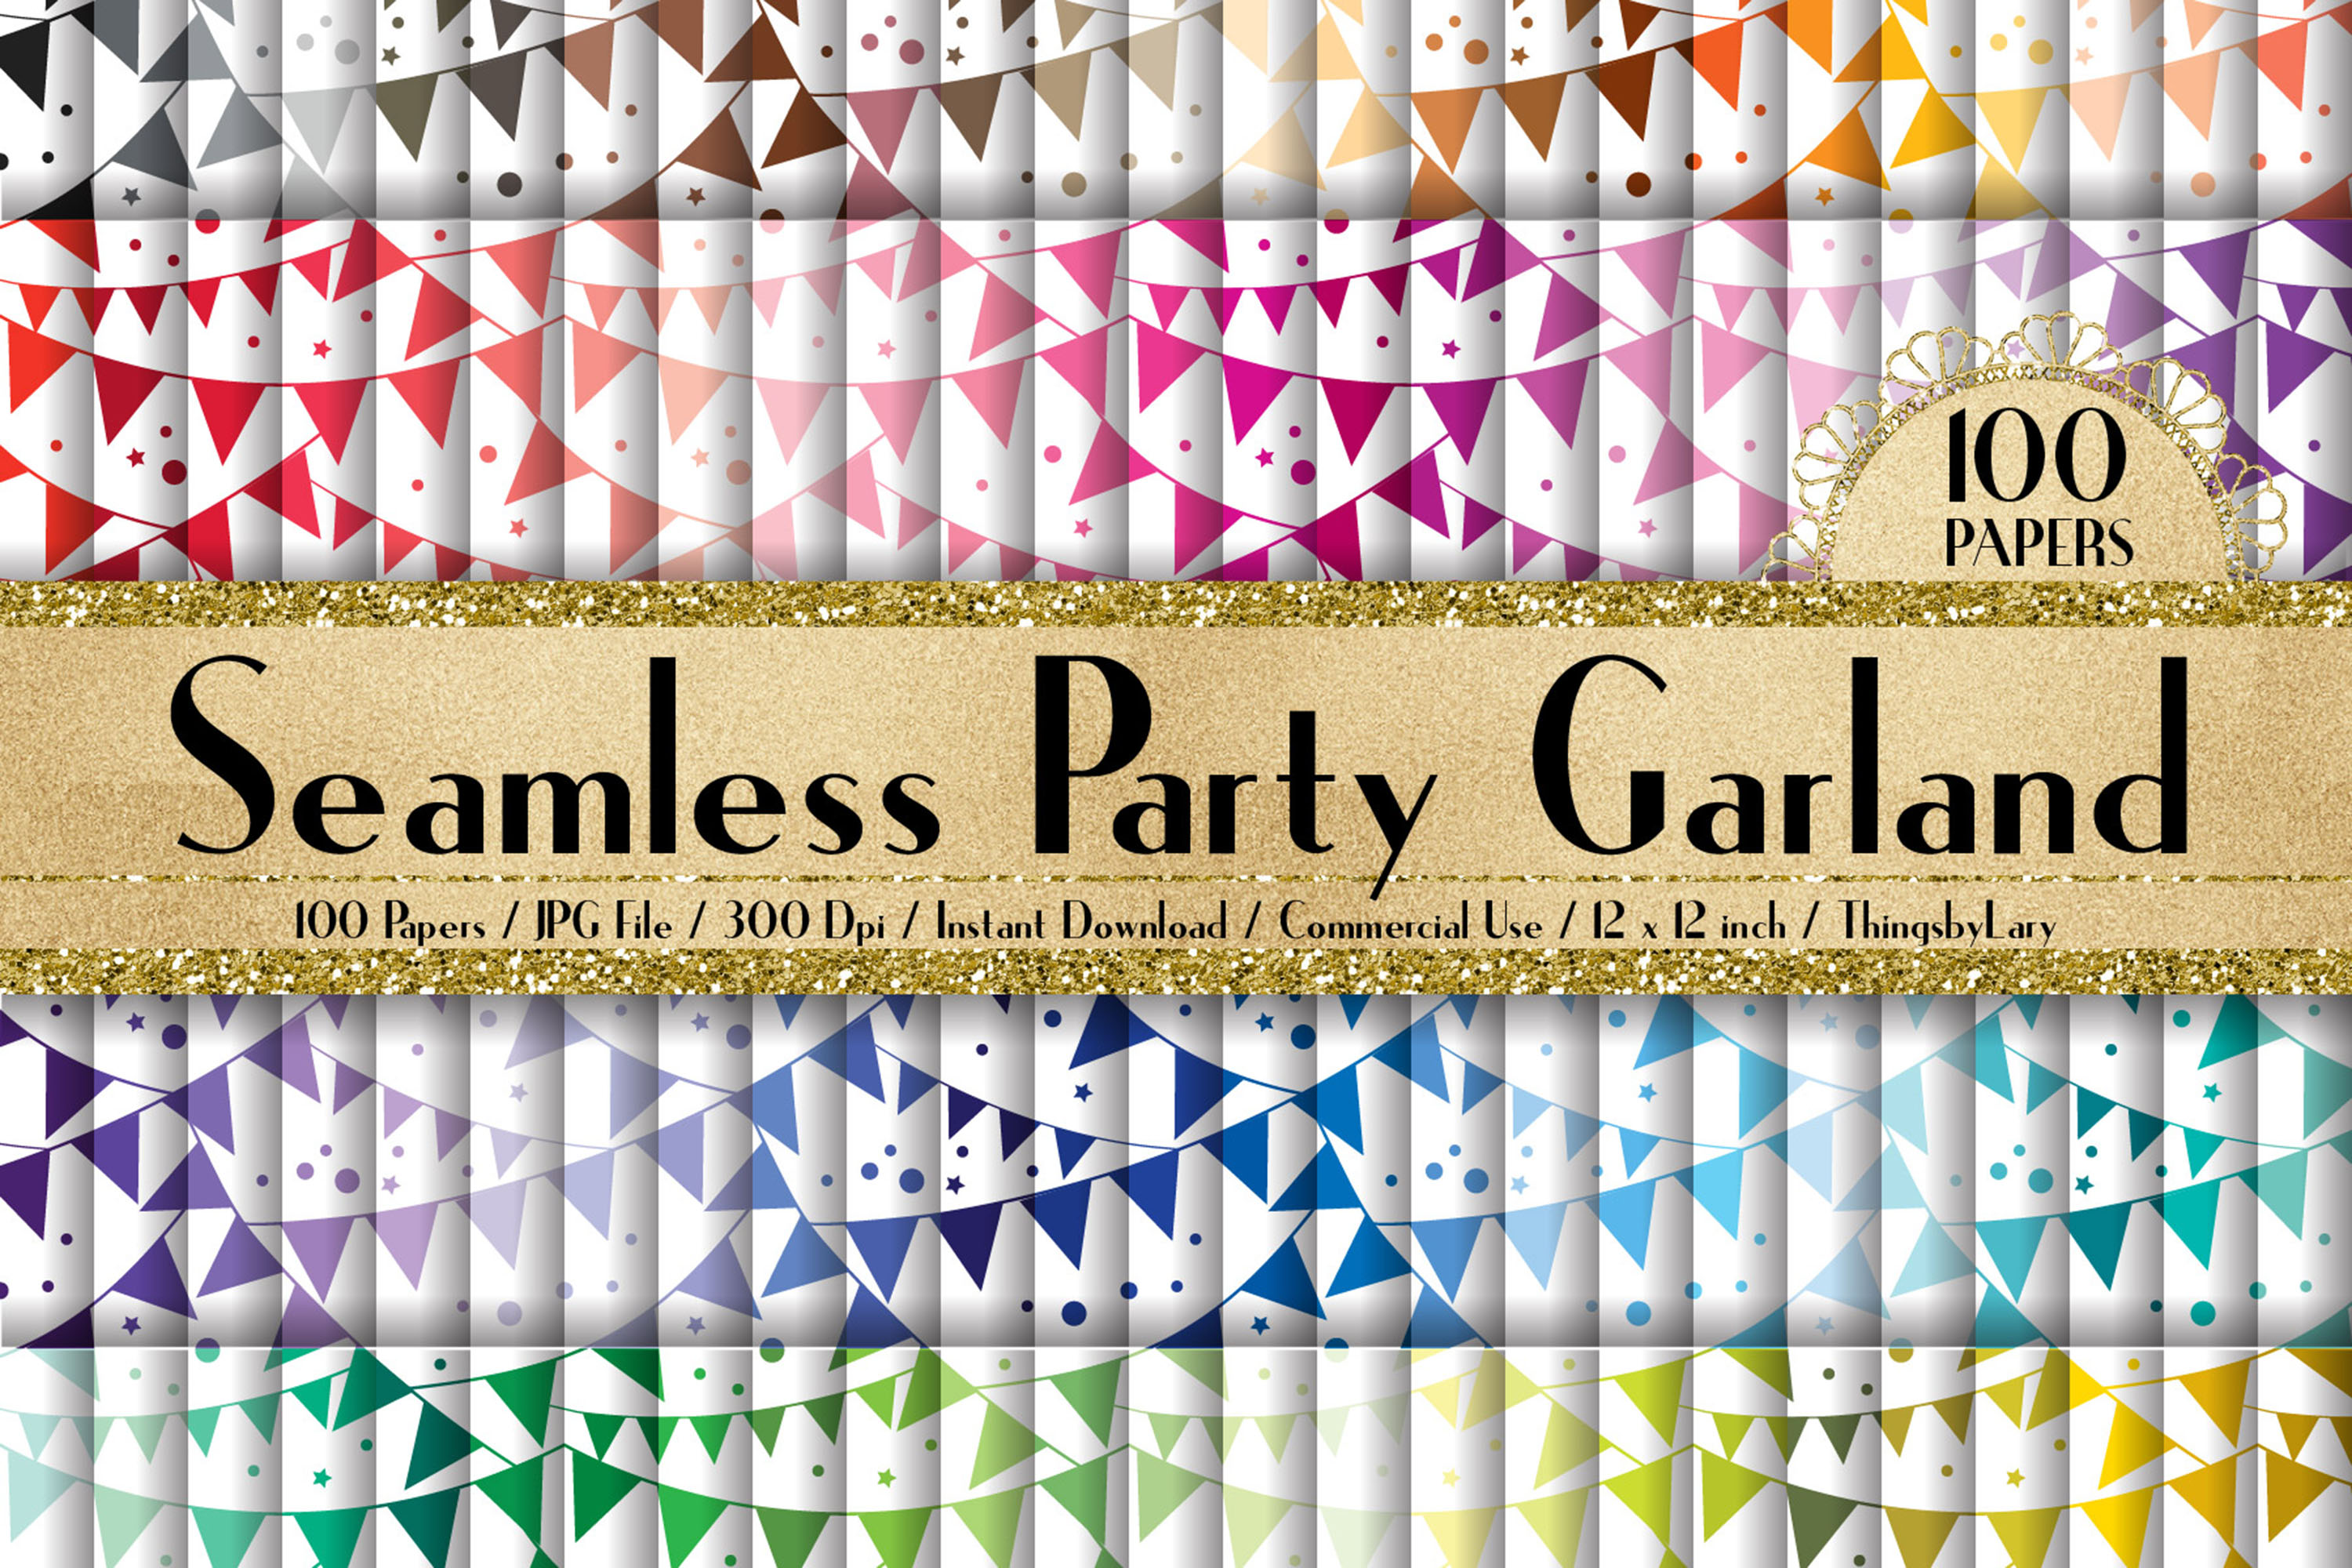 100 Seamless Party Garland Digital Papers, Birthday Party